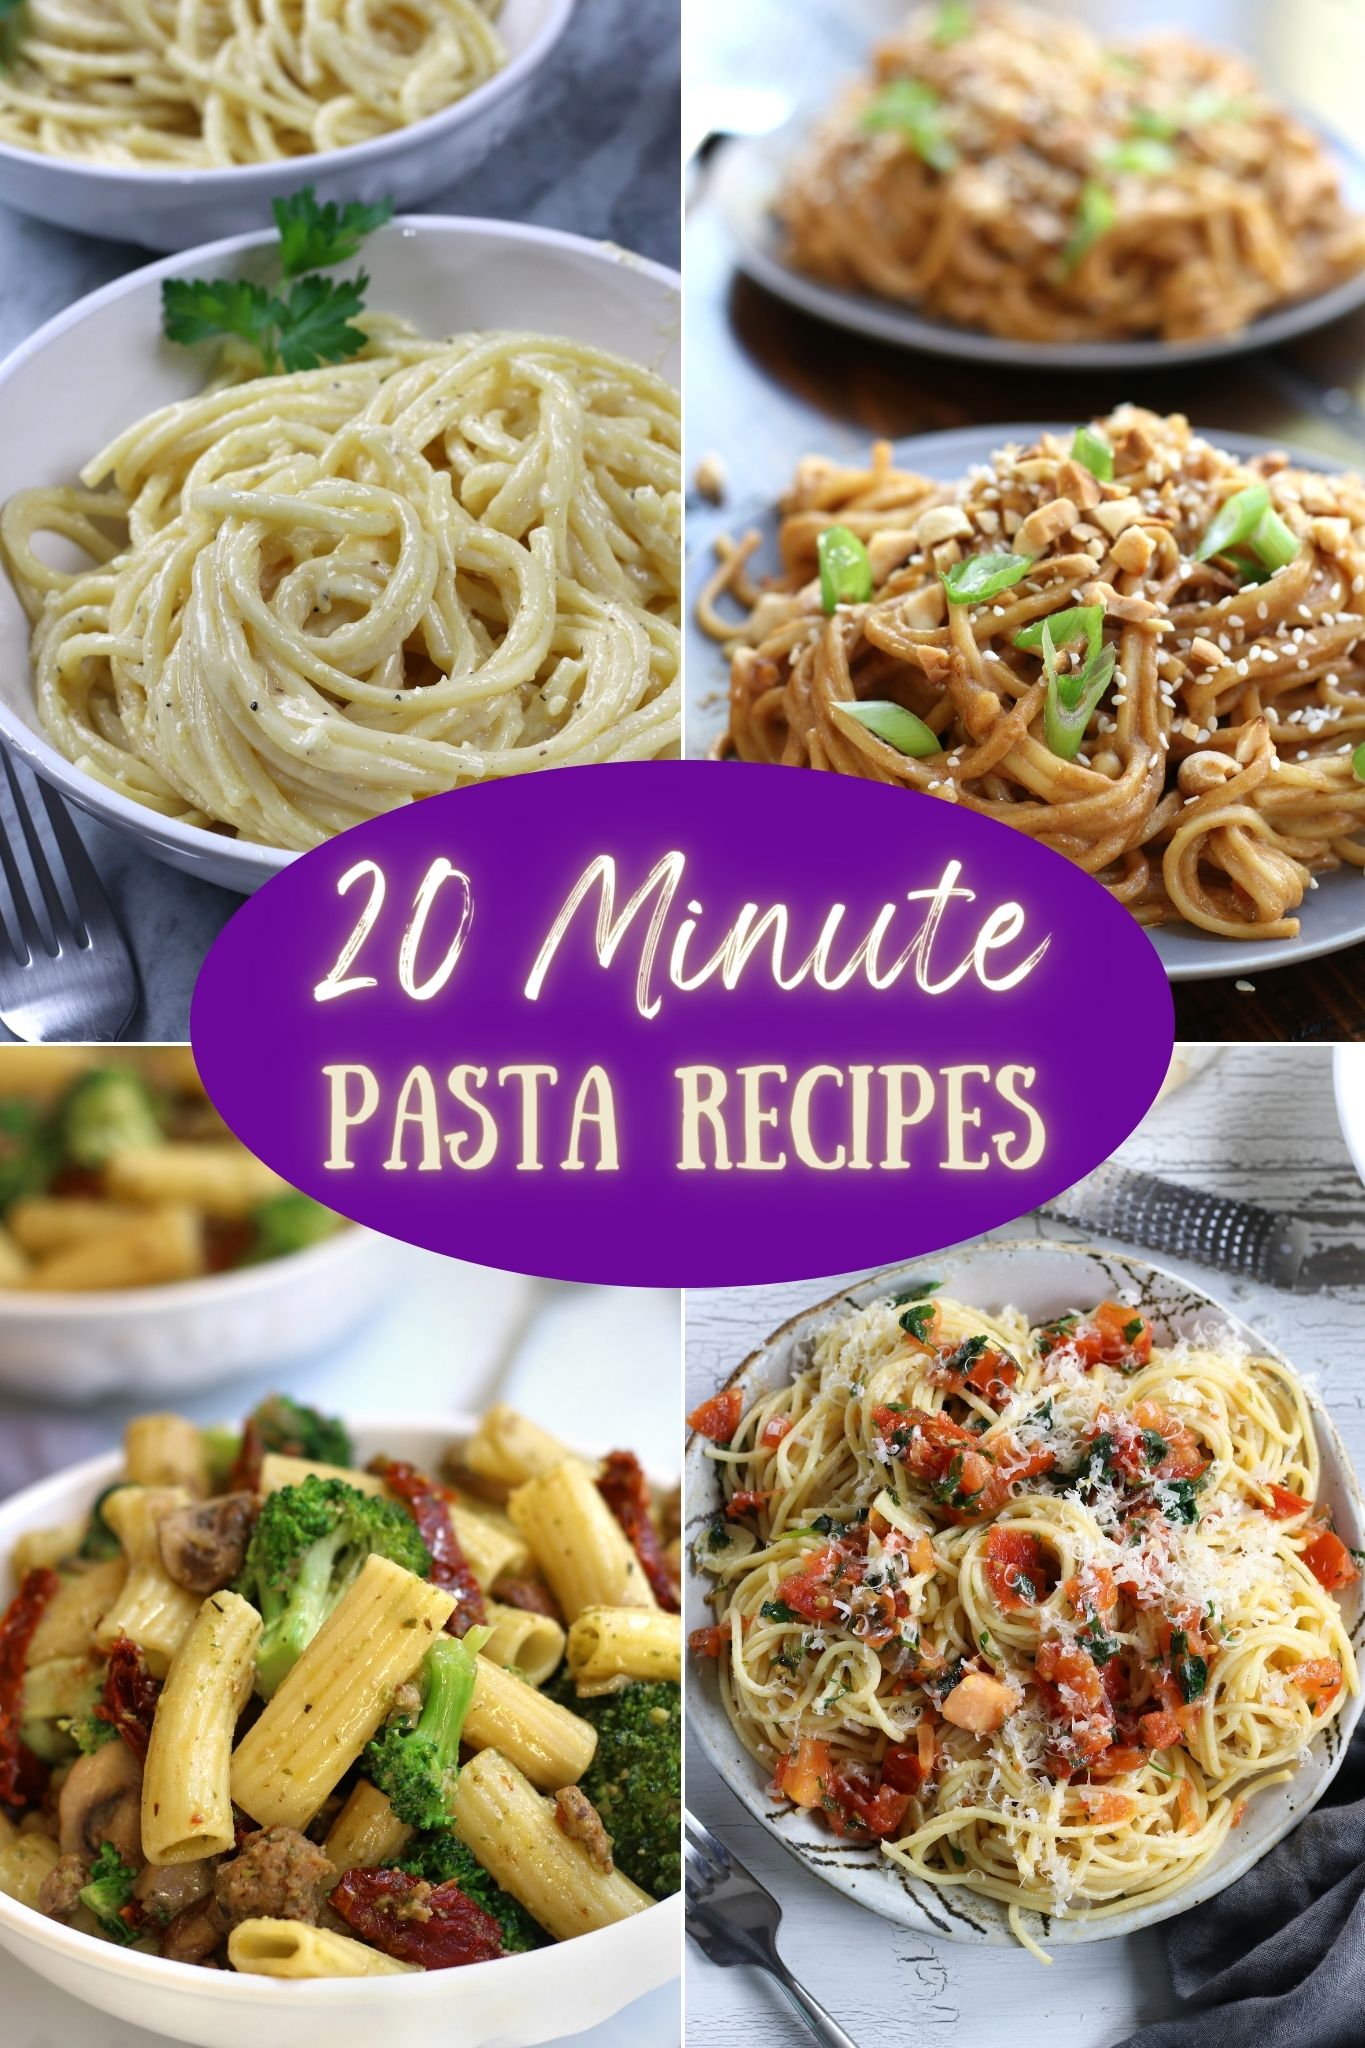 Most people struggle with what to make for a quick dinner that everyone will love. These 20 minute pasta recipes are family favorites that are quick, easy, and delicious. Bonus - they can be served in about 20 minutes. #20MinutePasta #20MinutePastaRecipes #20MinutePastaMeals #20MinutePastaDinners